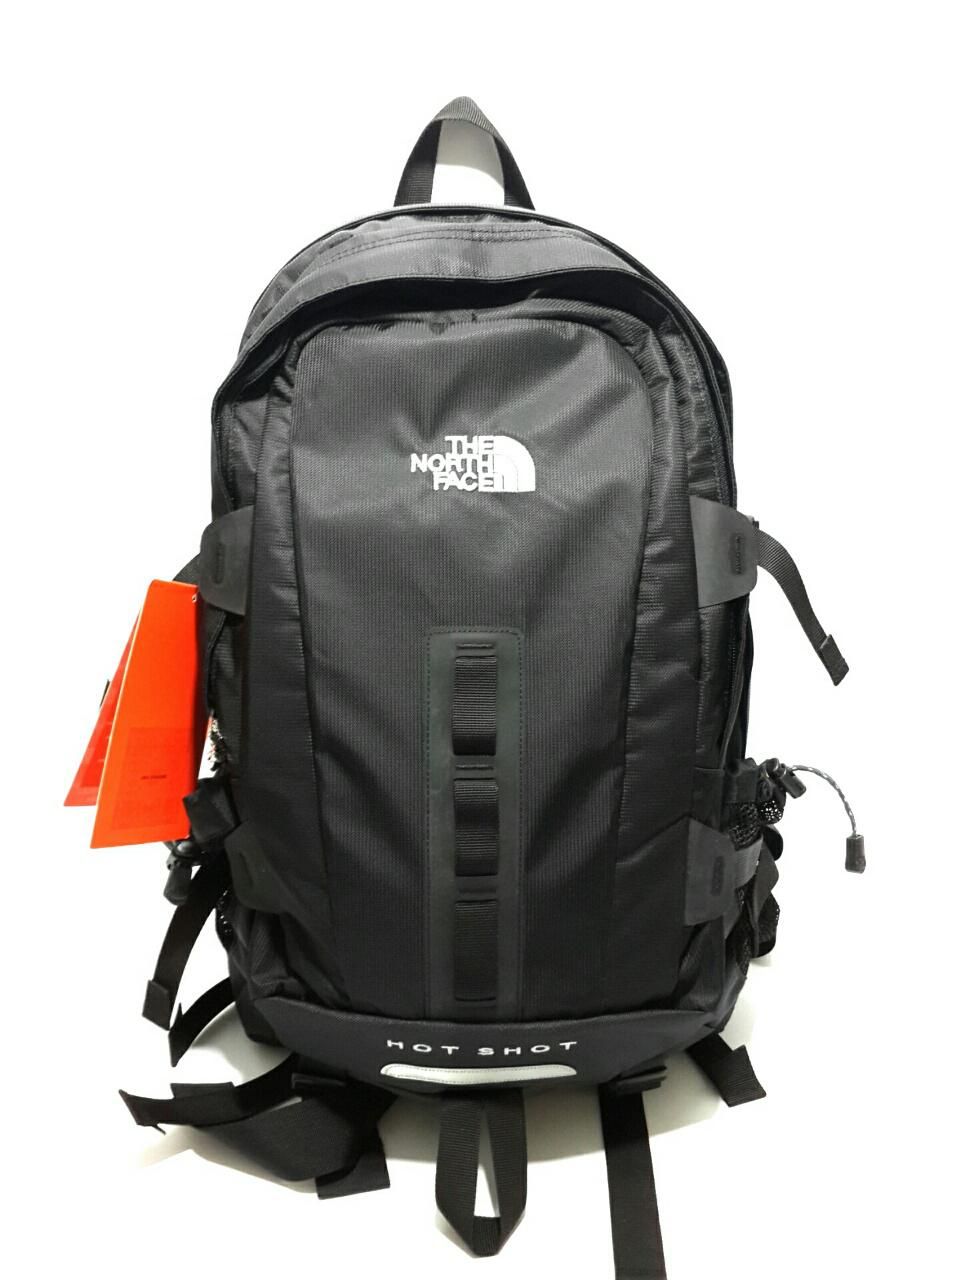 Ba lô The North Face Backpack Hotshot (loại 1) - 000065